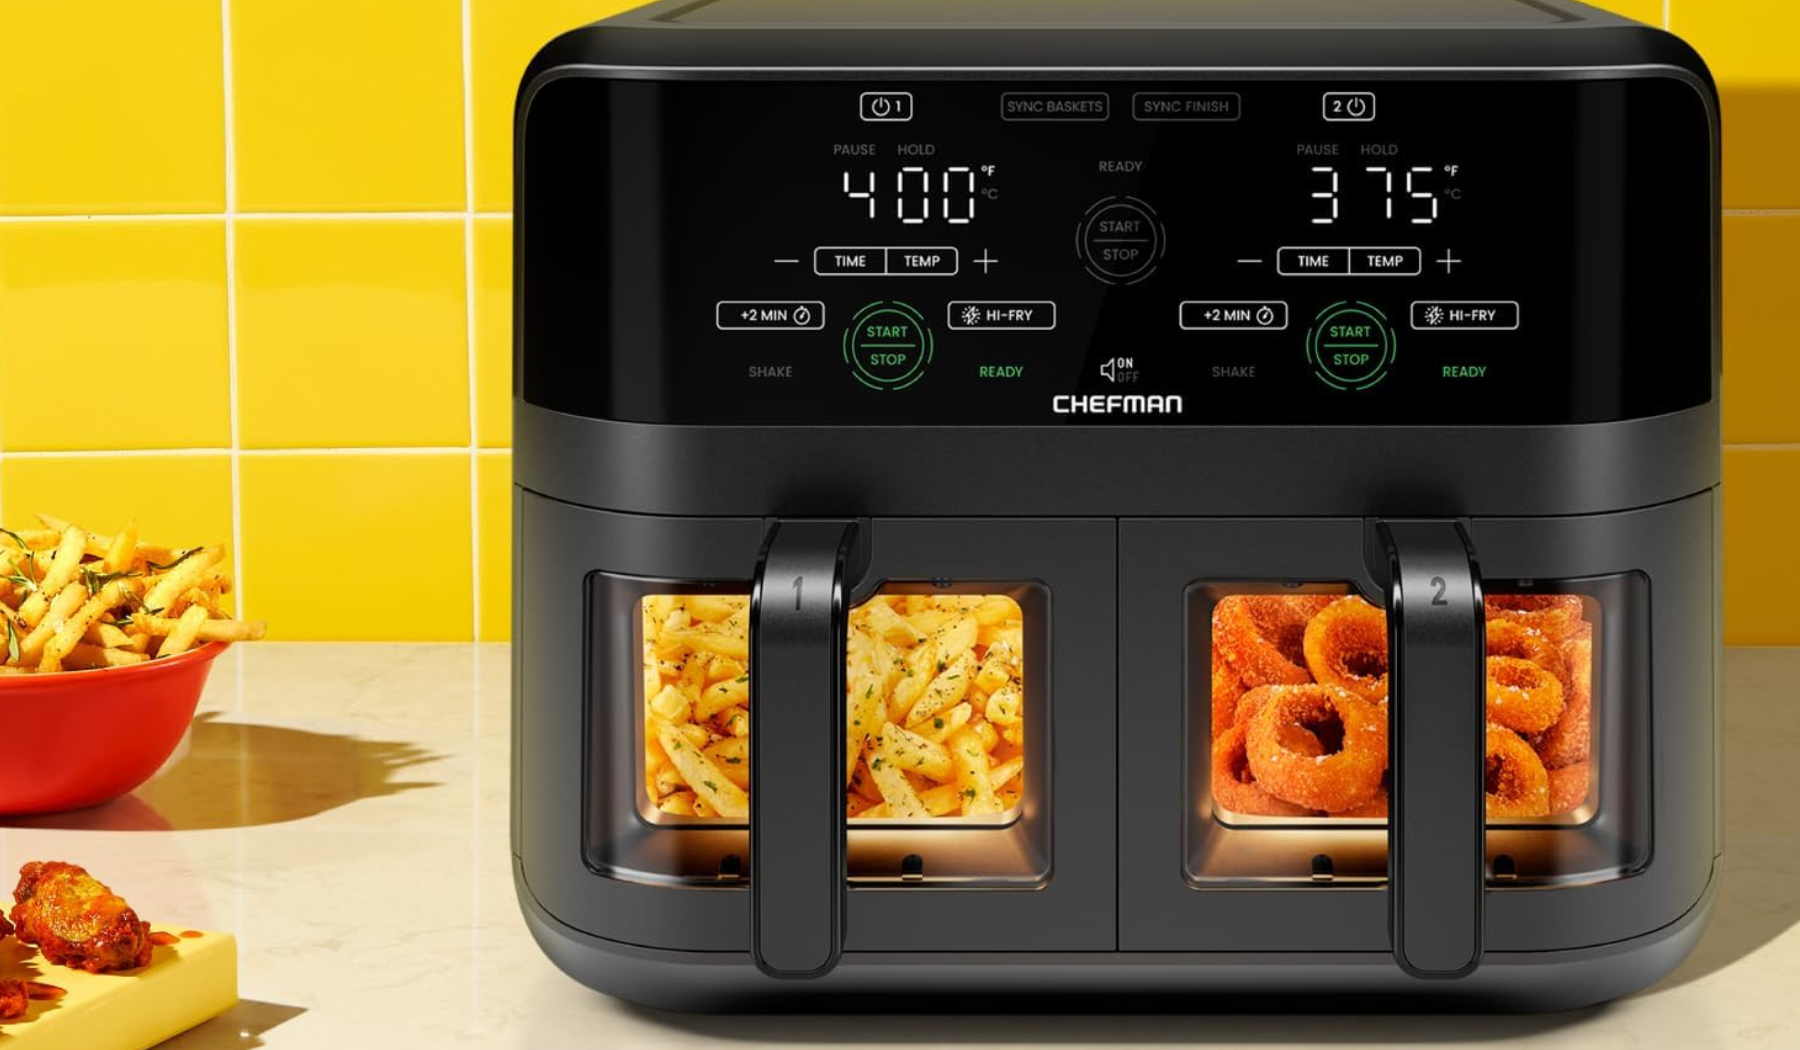 Early Prime Day kitchen deals: Frozen drink makers, air fryers, more